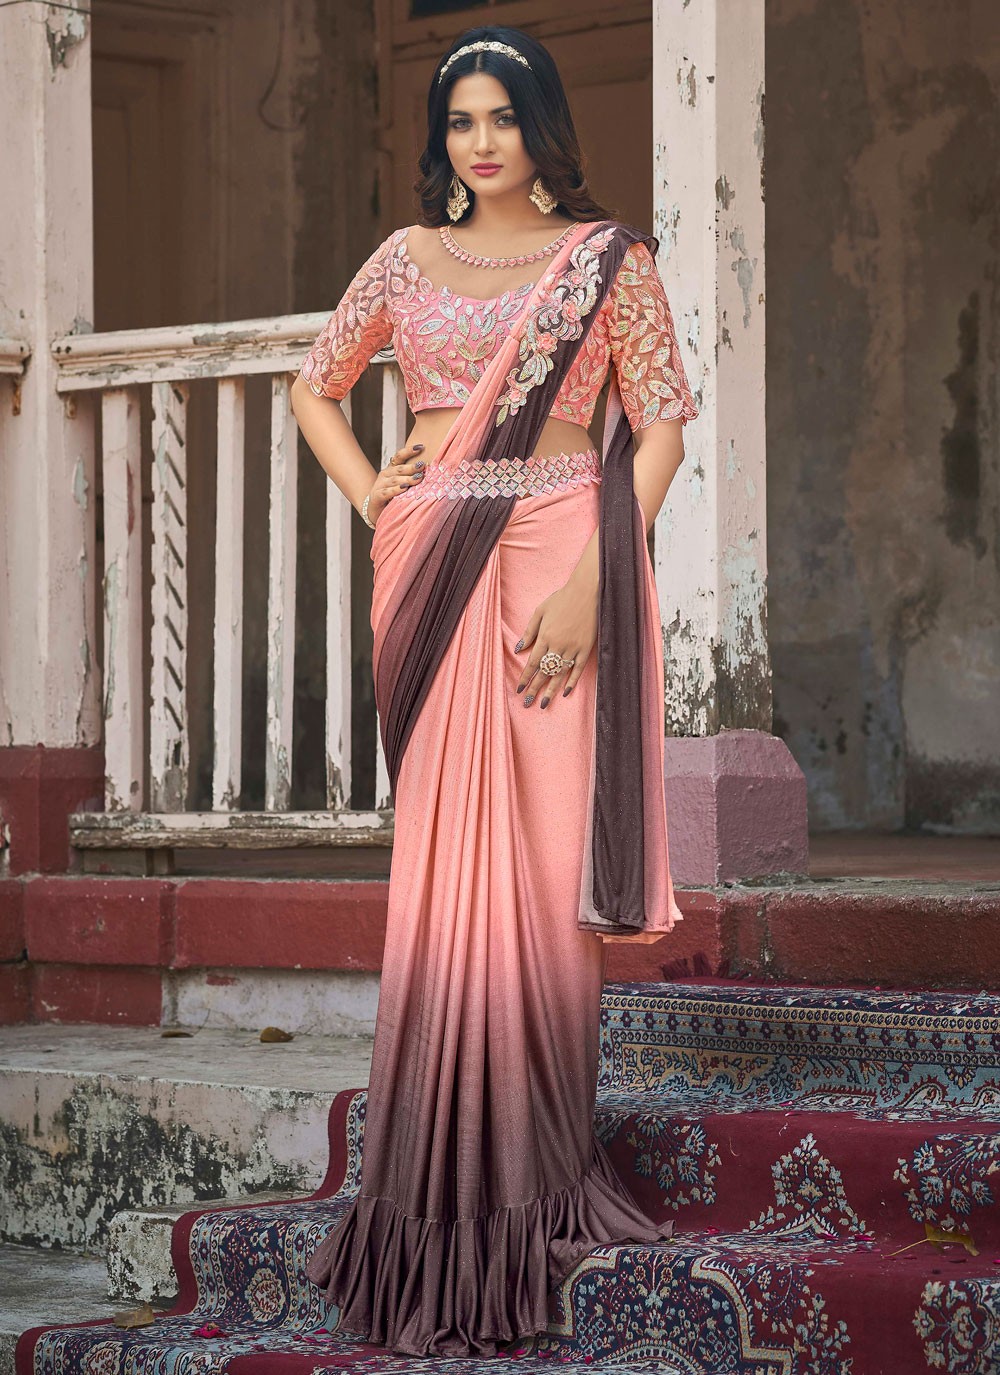 How to Start Fancy Designer Sarees Manufacturing Business in India?